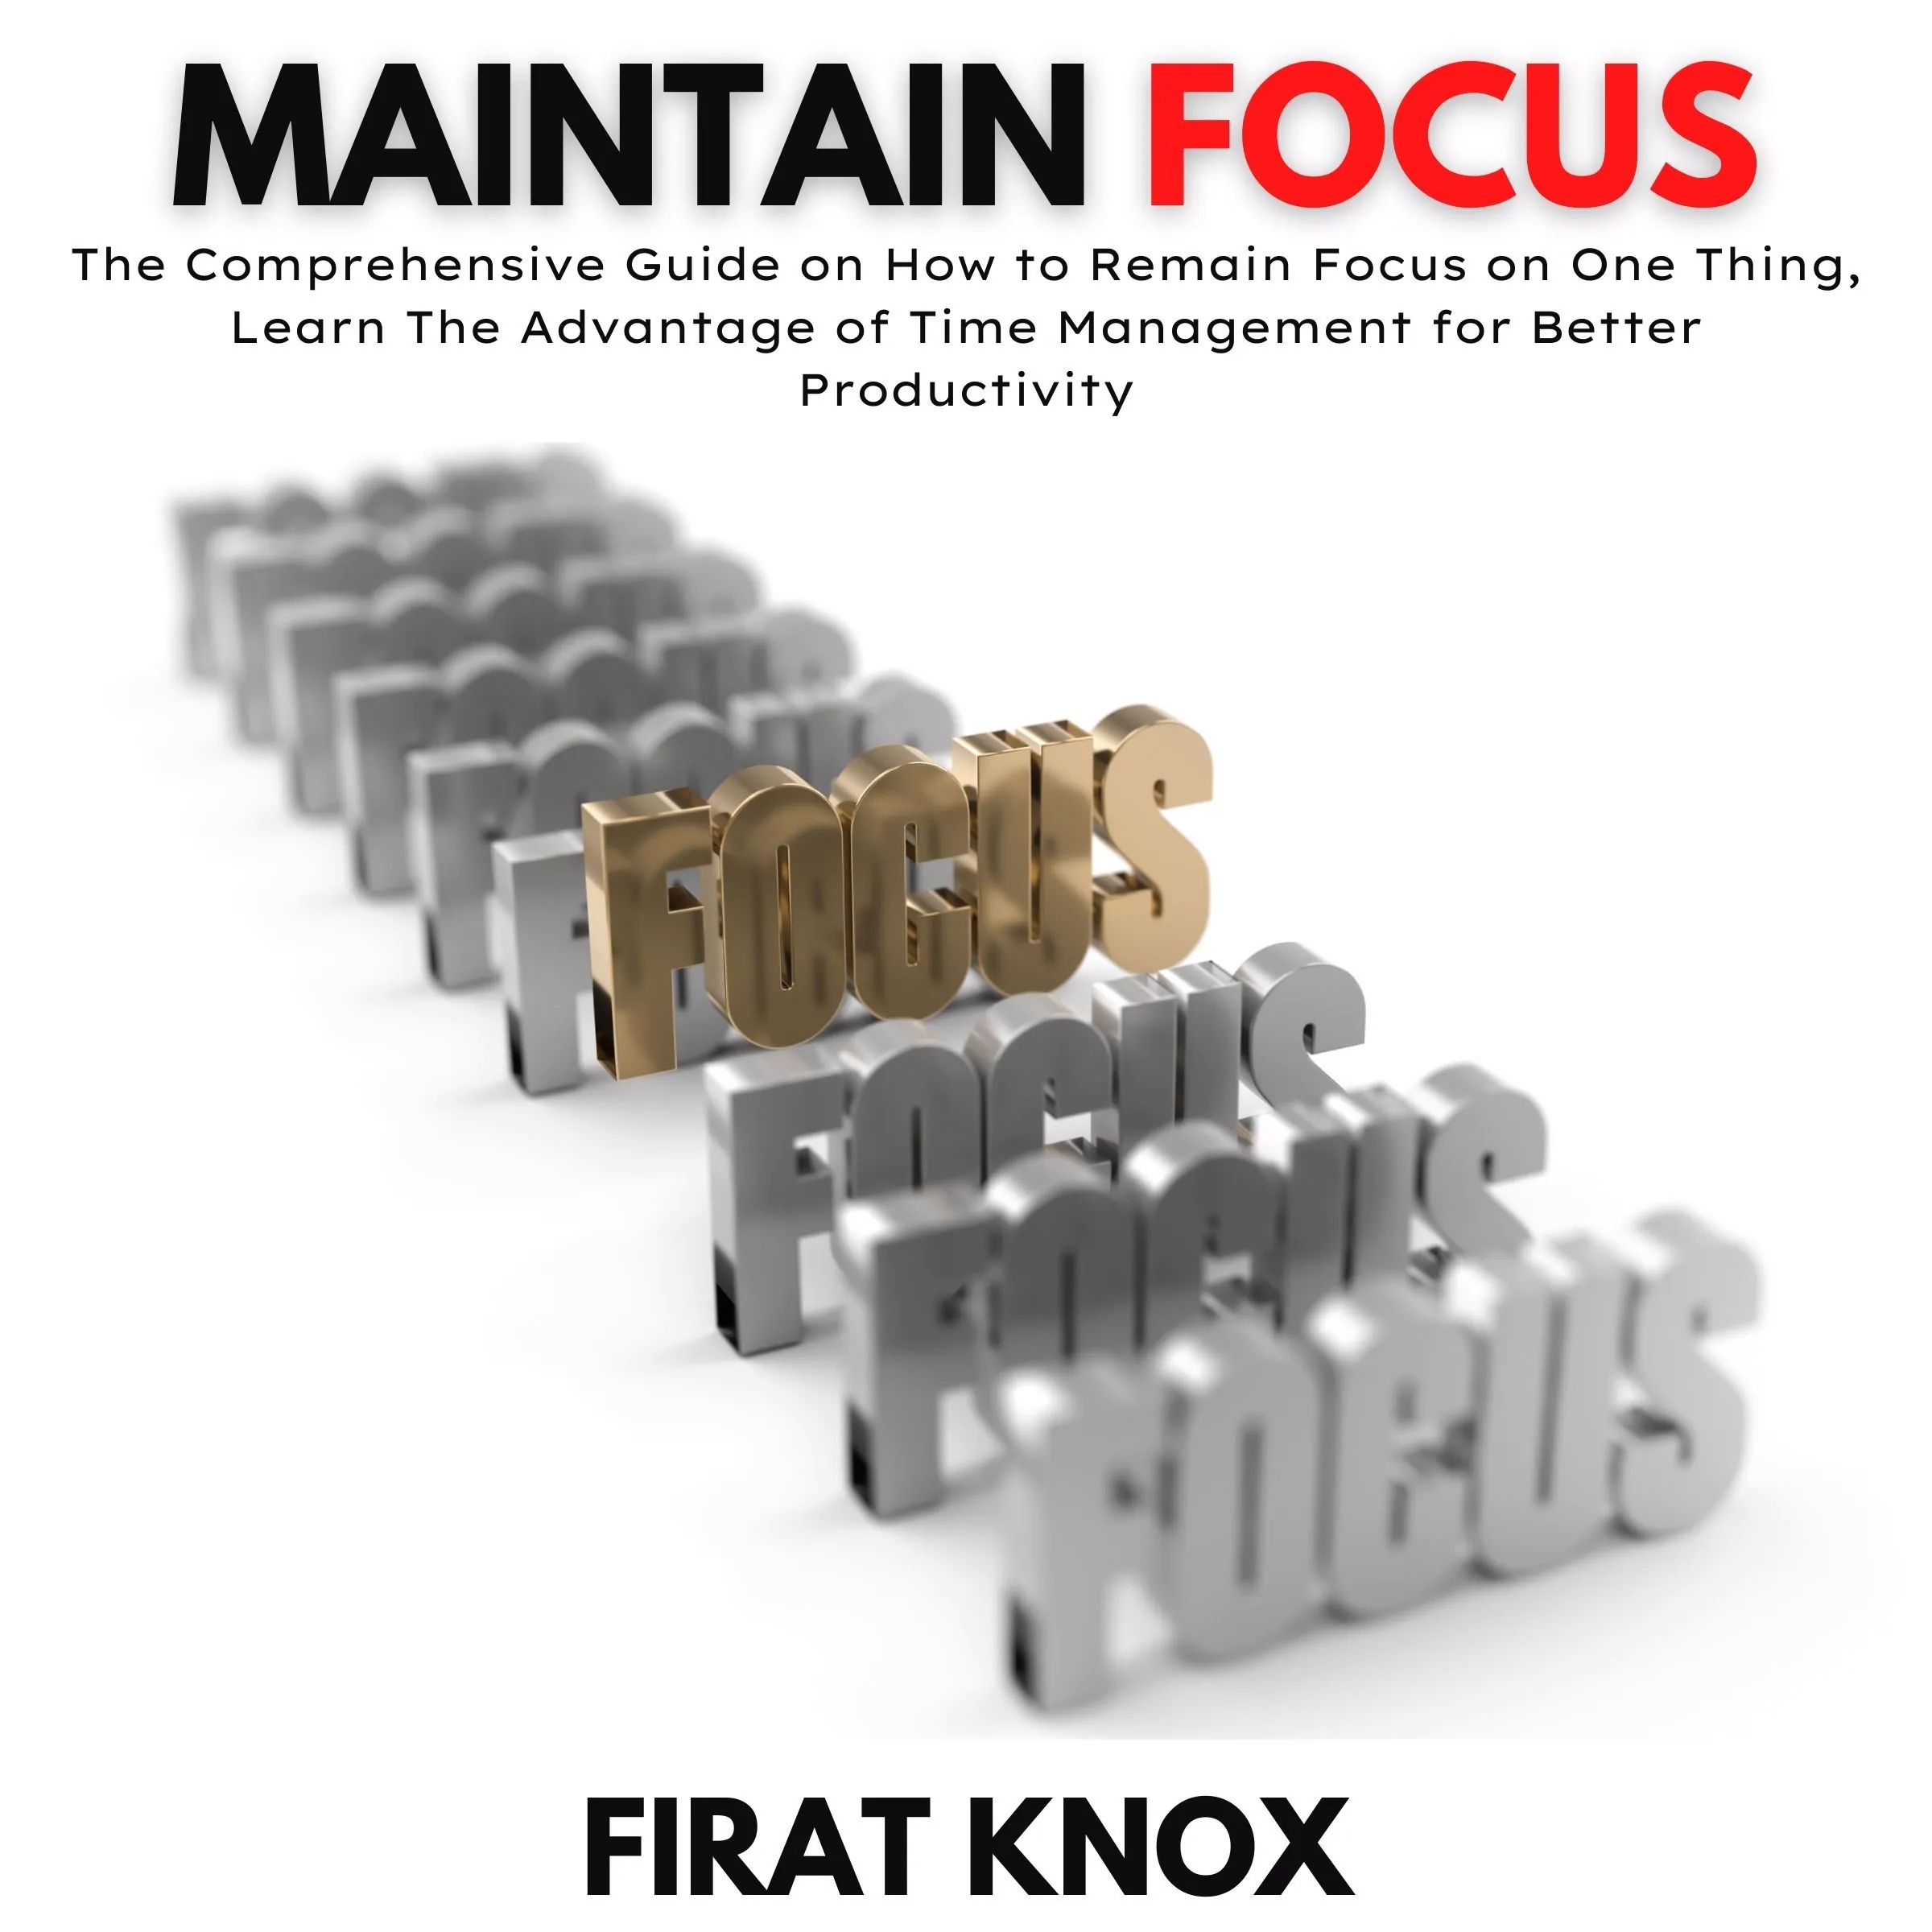 Maintain Focus Audiobook by Firat Knox